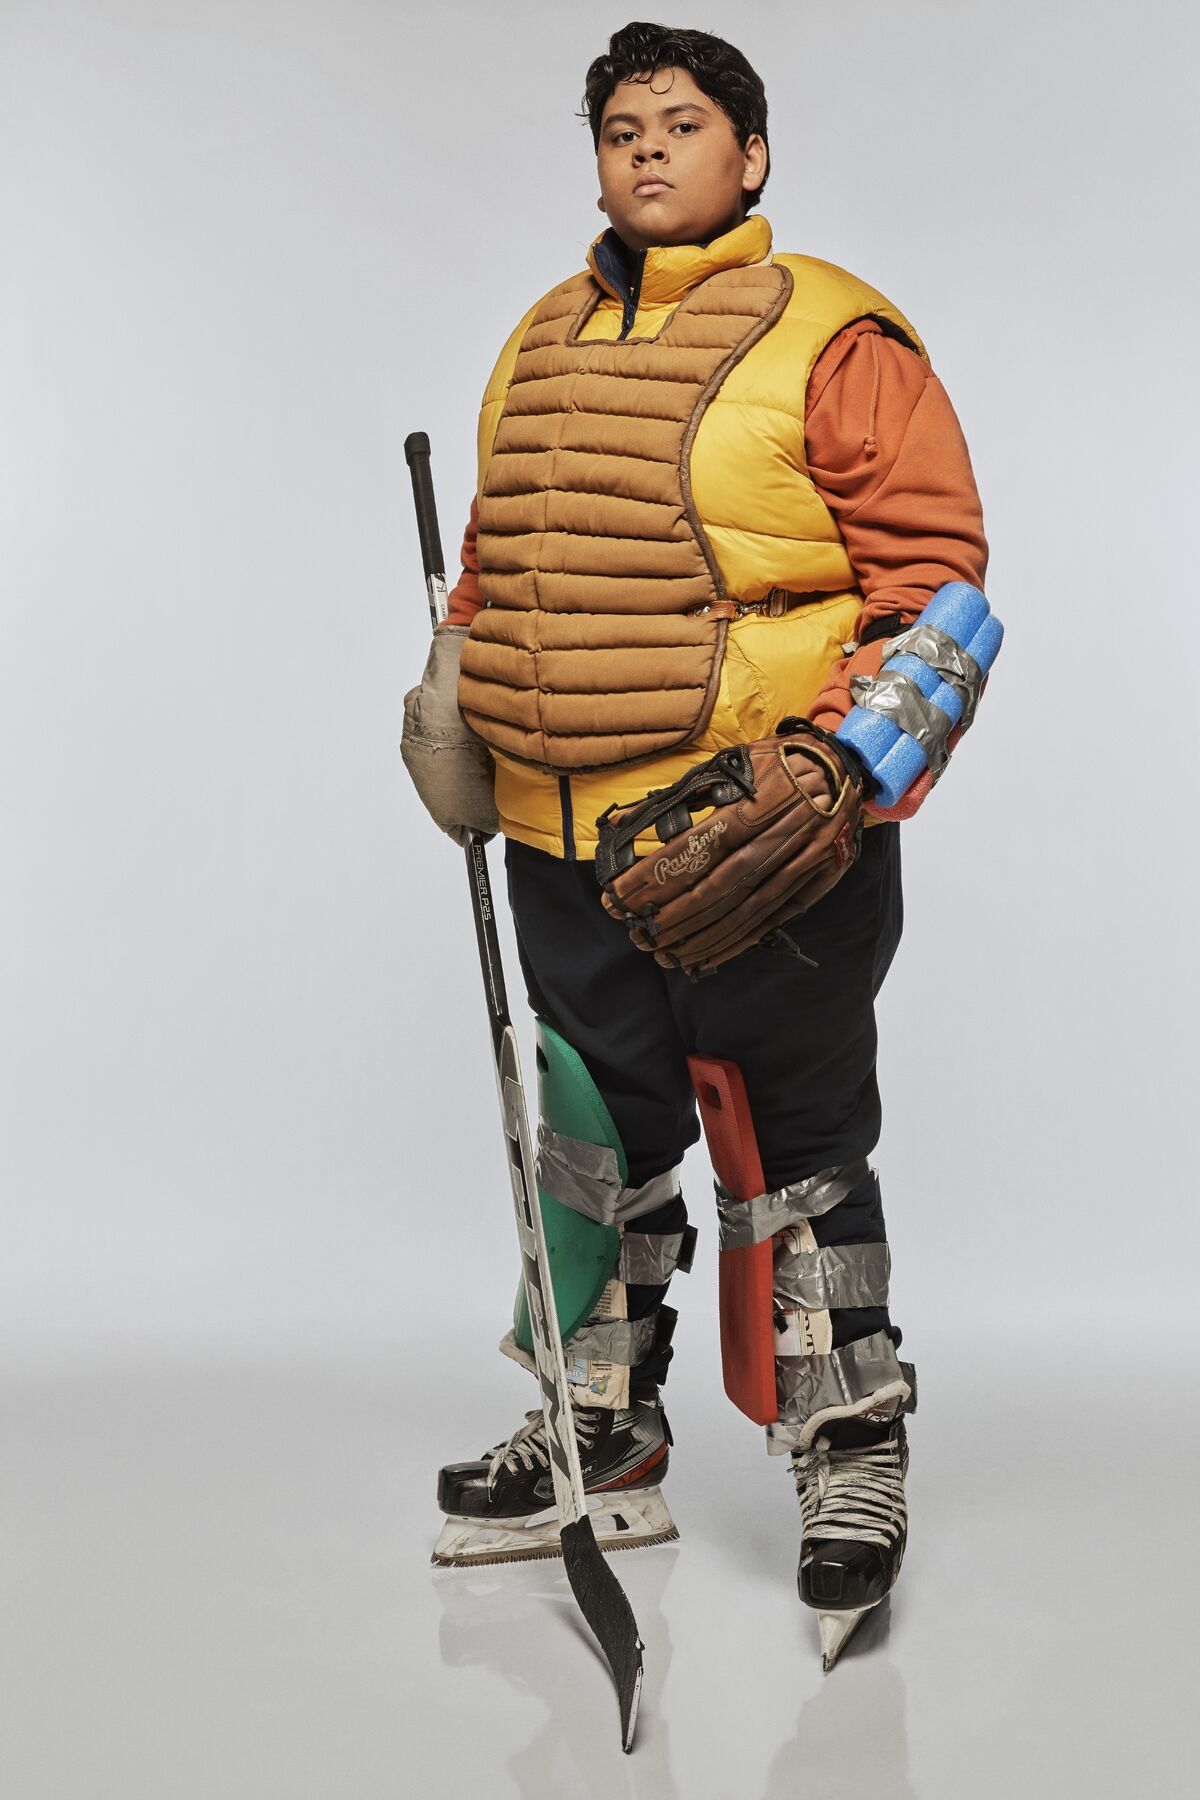 Evan Morrow from The Mighty Ducks: Game Changers Costume, Carbon Costume